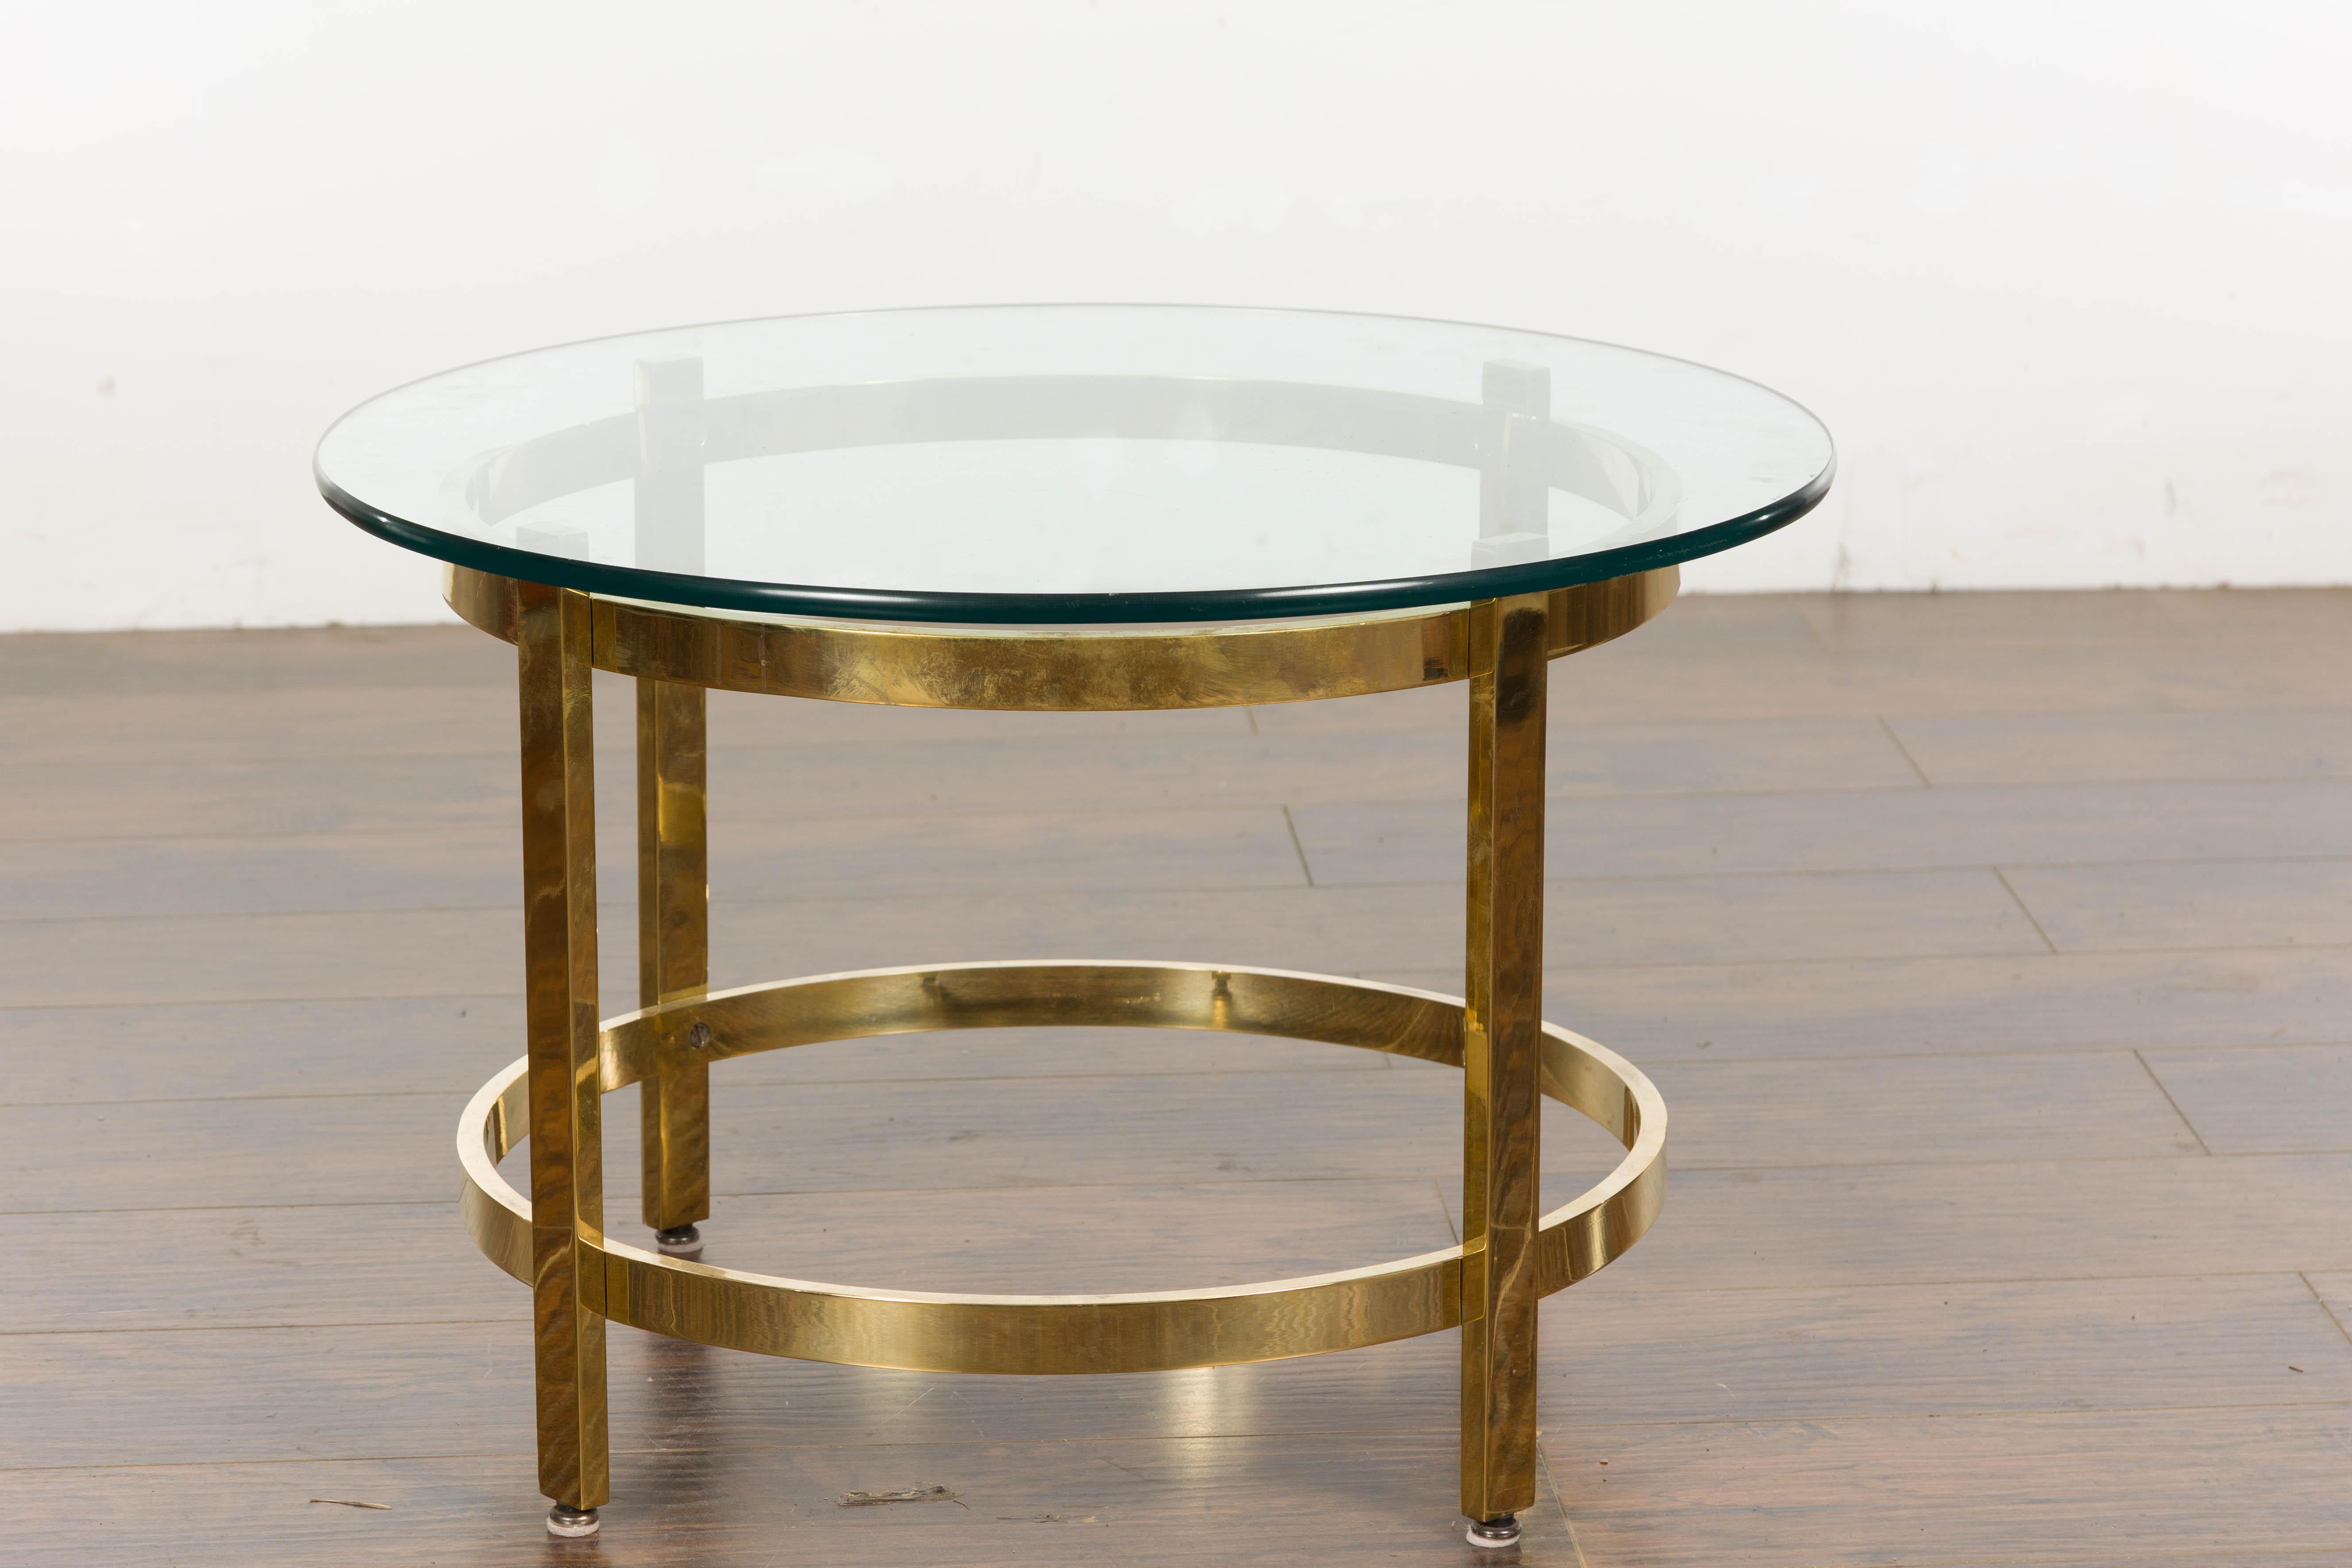 1950s Midcentury Italian Brass Side Table with Round Glass Top For Sale 4